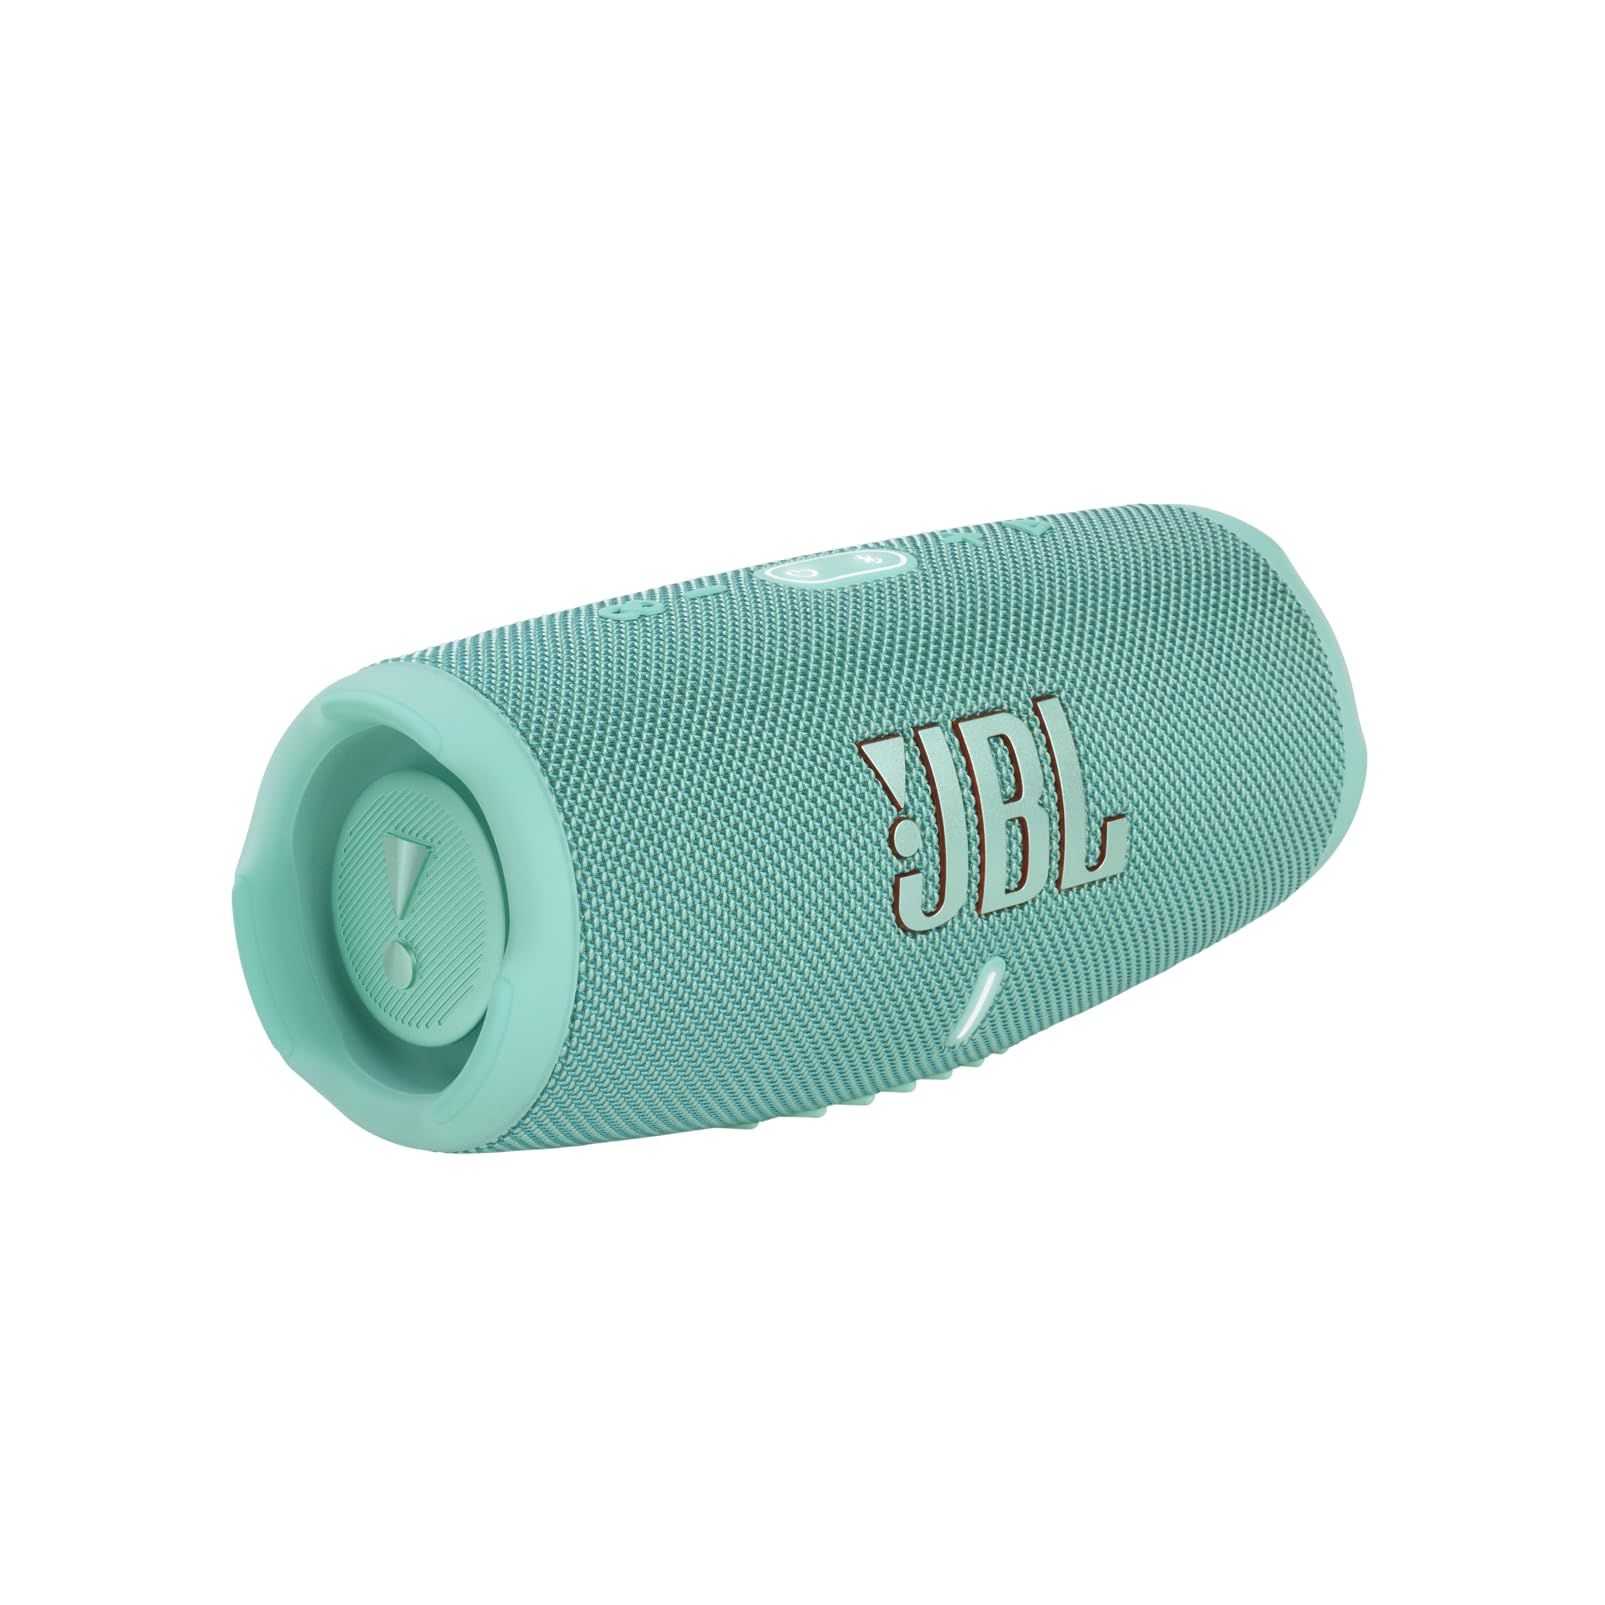 JBL Charge 5 Portable Wireless Bluetooth Speaker with IP67 Waterproof and USB Charge Out - Teal, ... | Amazon (US)